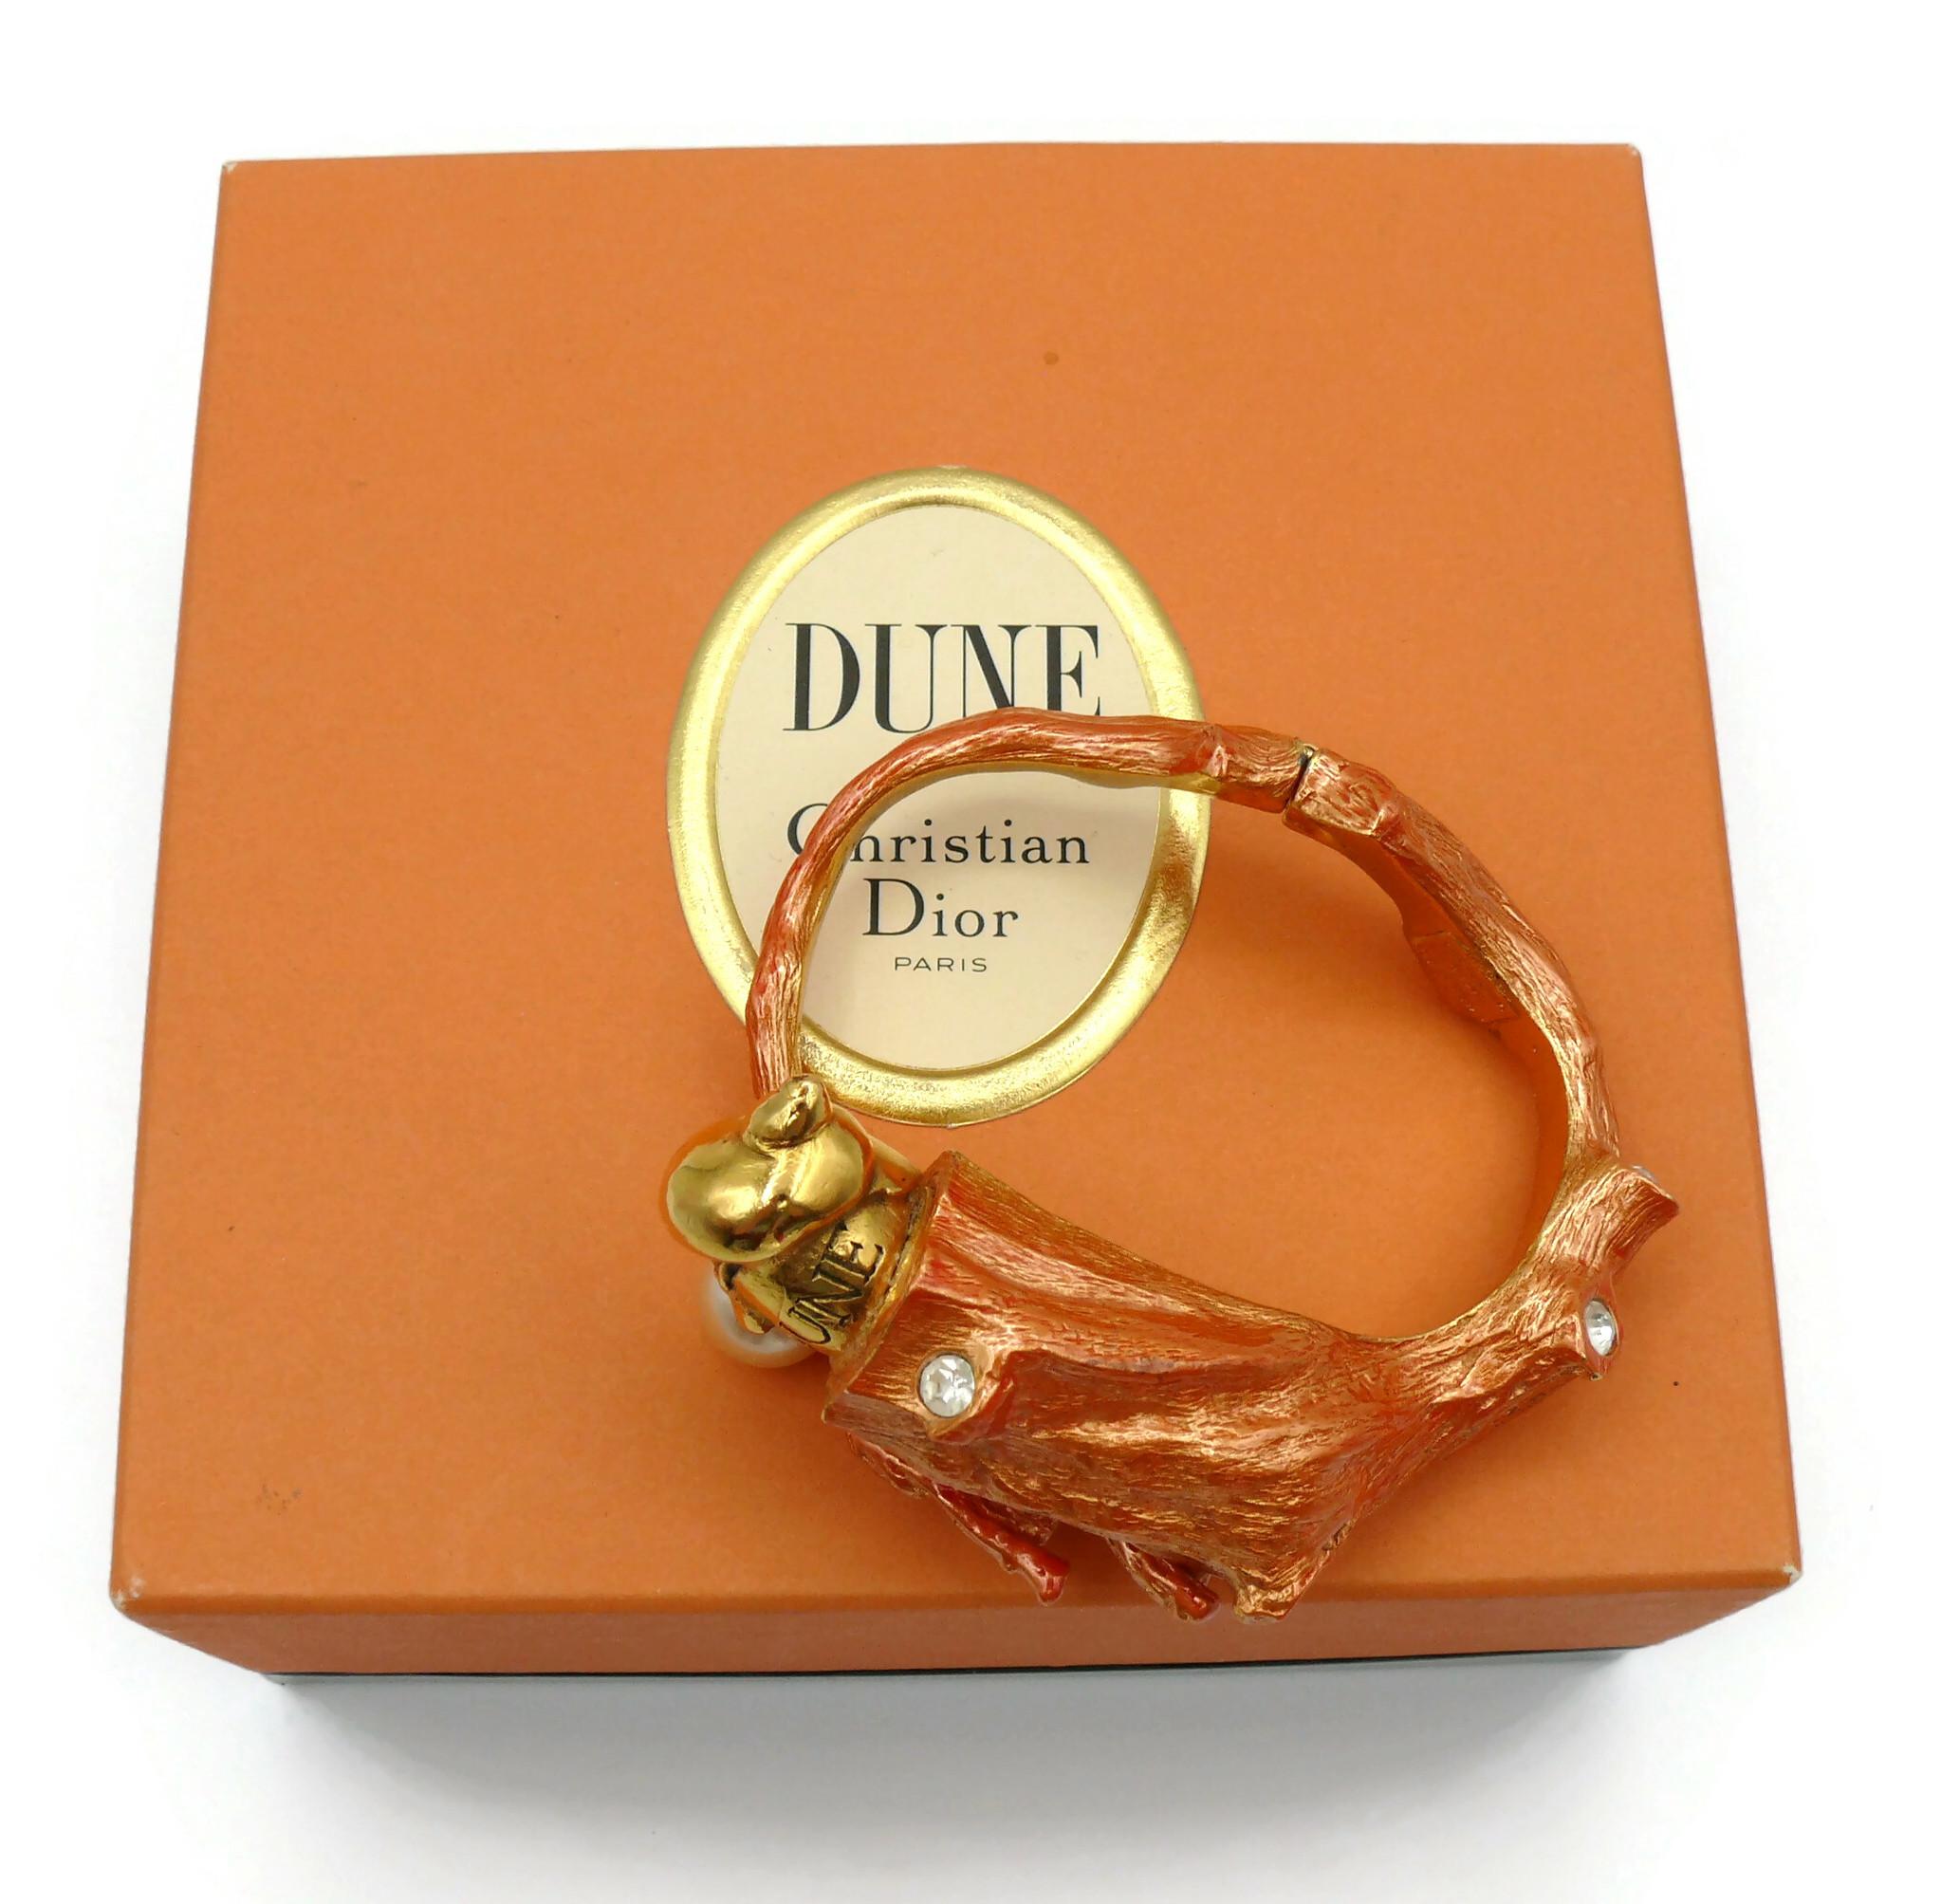 CHRISTIAN DIOR vintage shell clamper bracelet created by the French parurier ROBERT GOOSSENS for the launch of the fragrance DUNE in 1987.

This gold toned with patina bracelet mimics a coral branch. It is embellished with a gold toned shell design